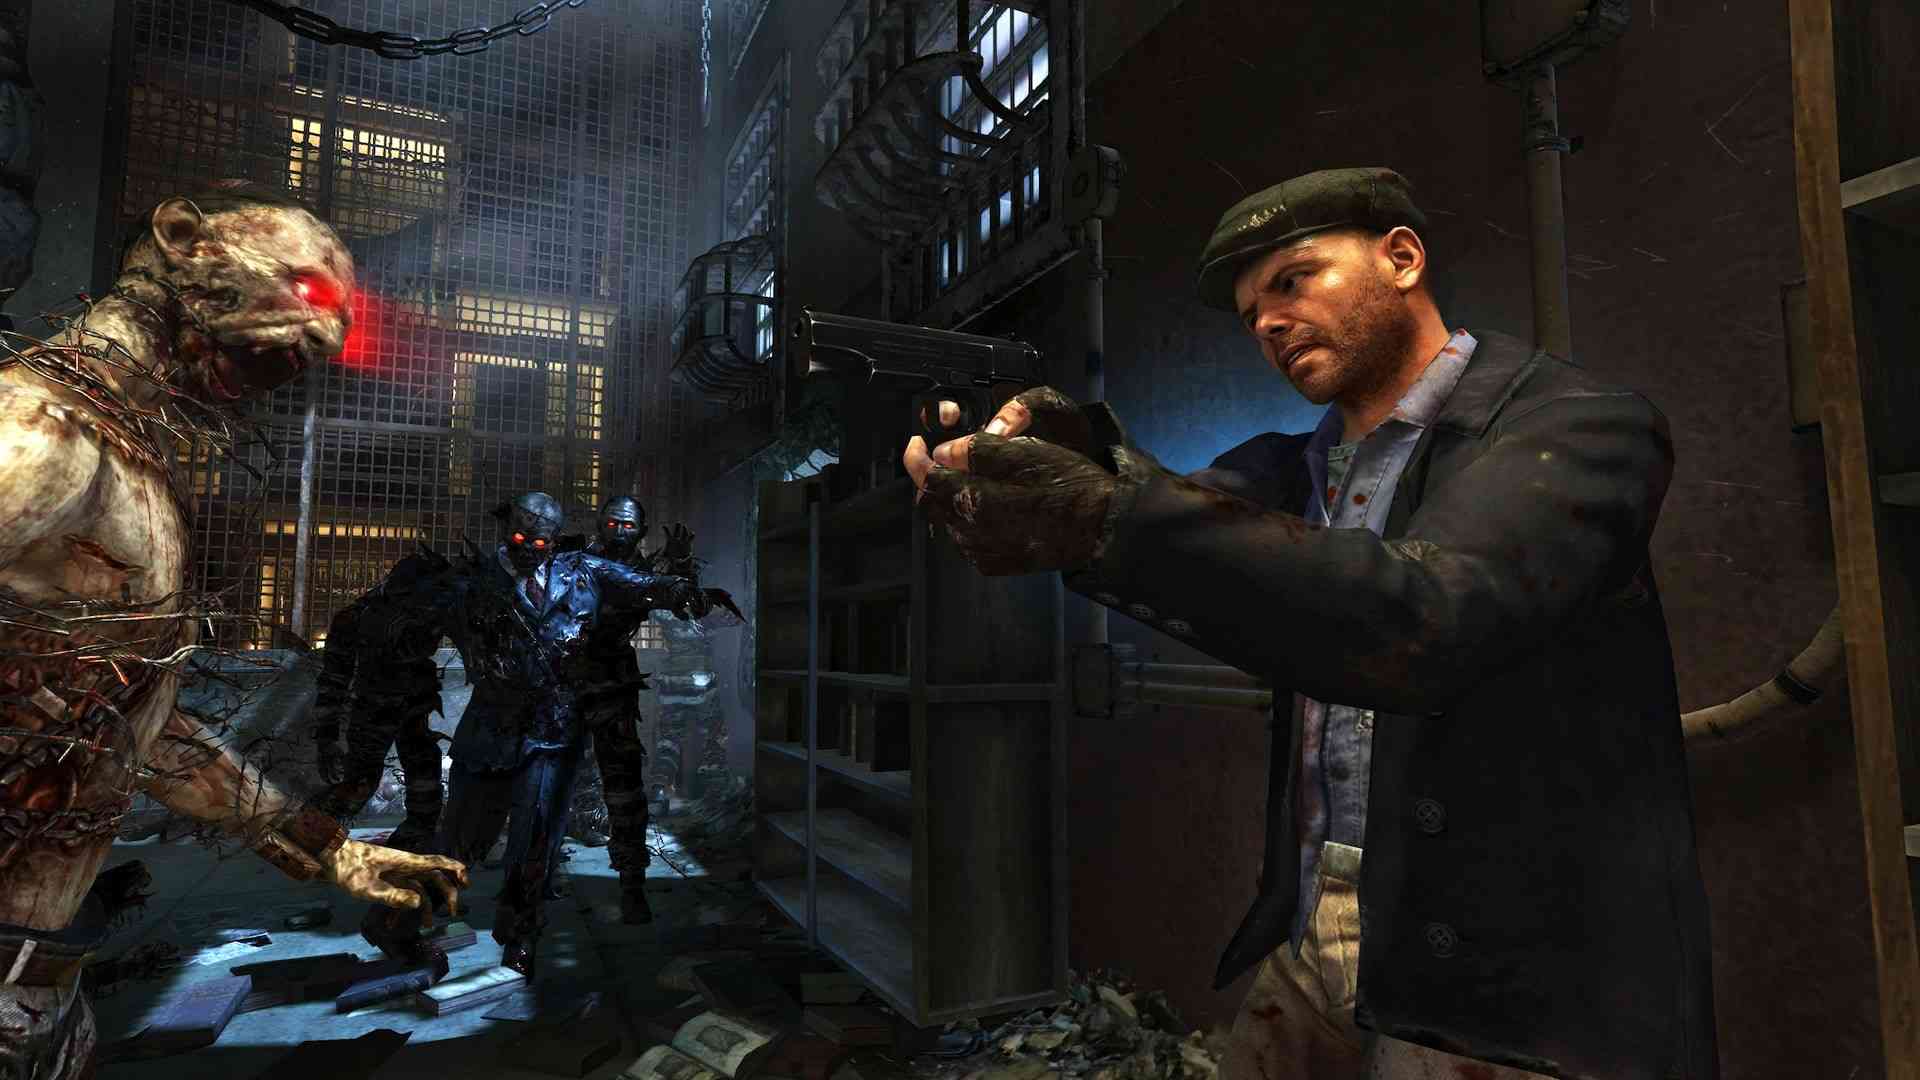 Black Ops 2 Uprising DLC Download - PC,PS3,Xbox360